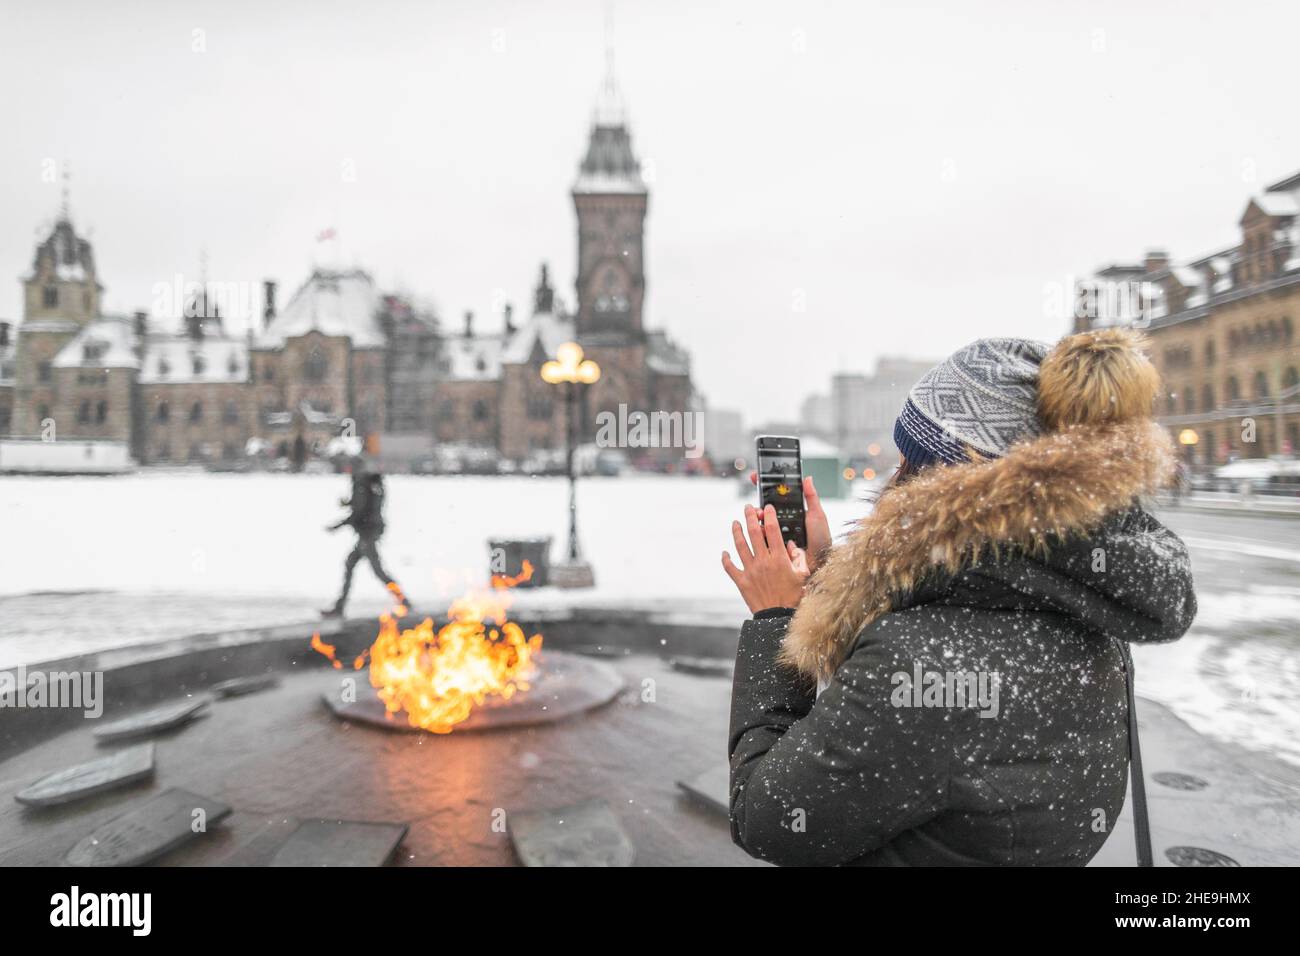 Ottawa travel tourist woman taking photo with phone of Canadian Parliament in Ontario, Canada. Snowing landscape and centennial flame that do not Stock Photo